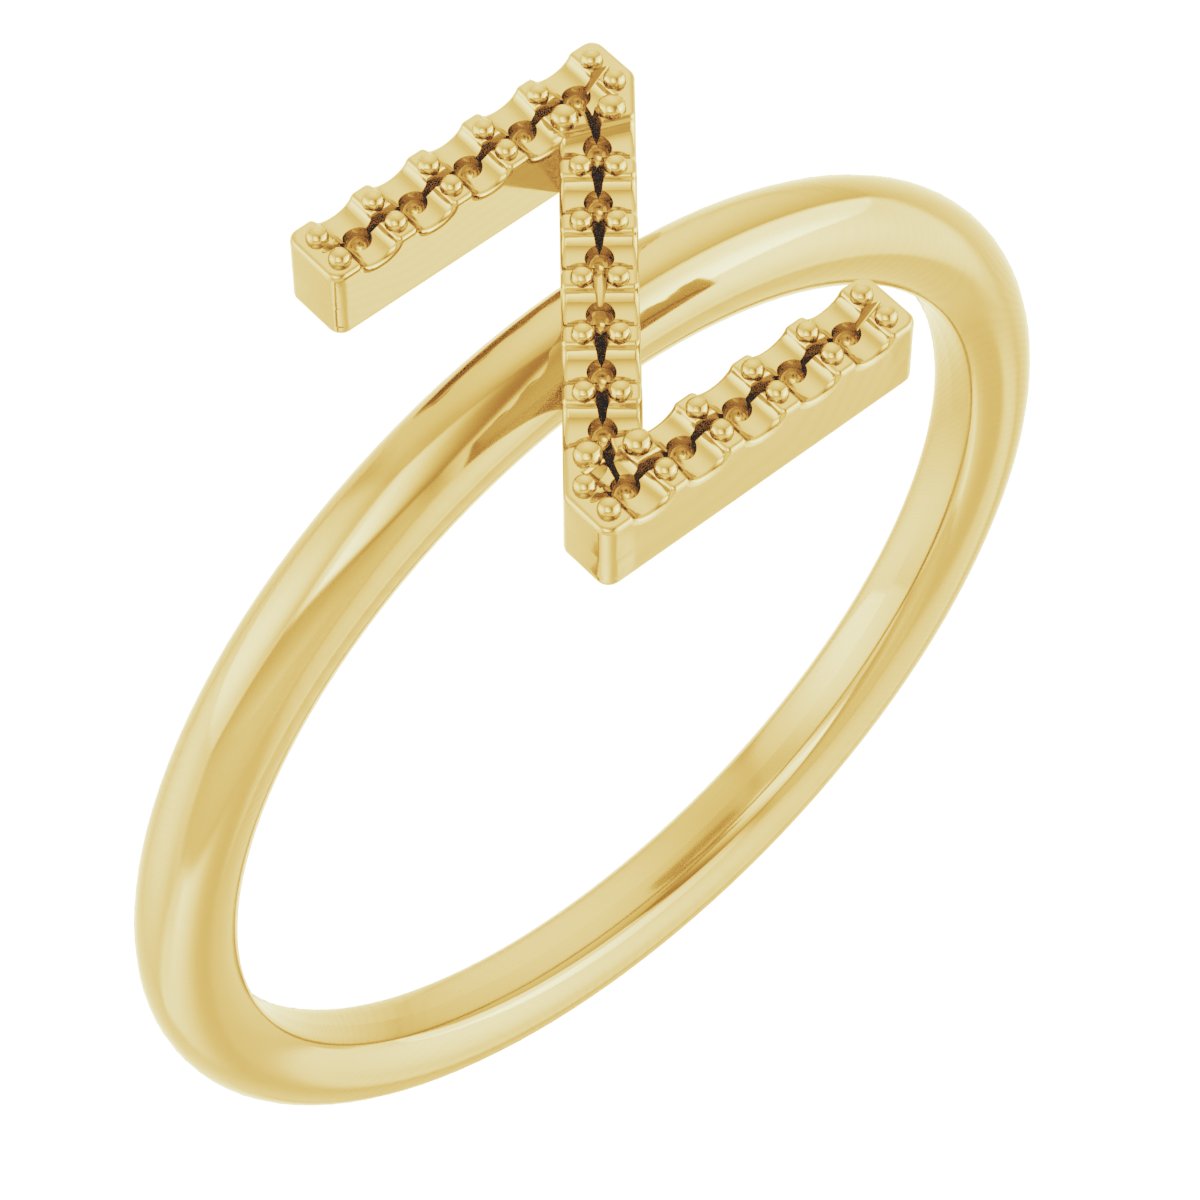 14K Yellow Accented Initial Z Ring Mounting